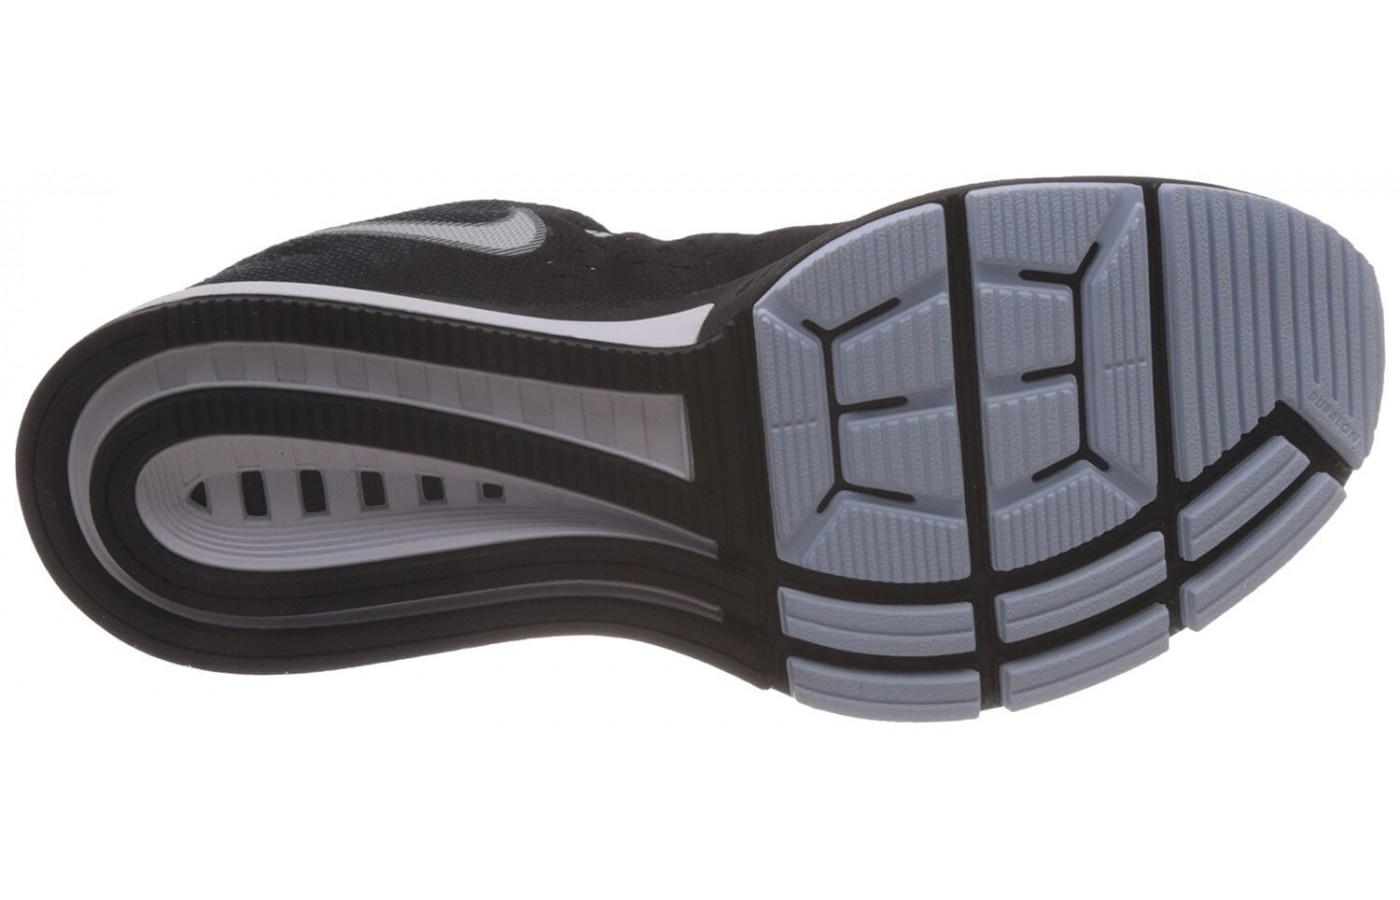 A highly stable and stylish outsole can be seen on the Nike Air Zoom Vomero 10.